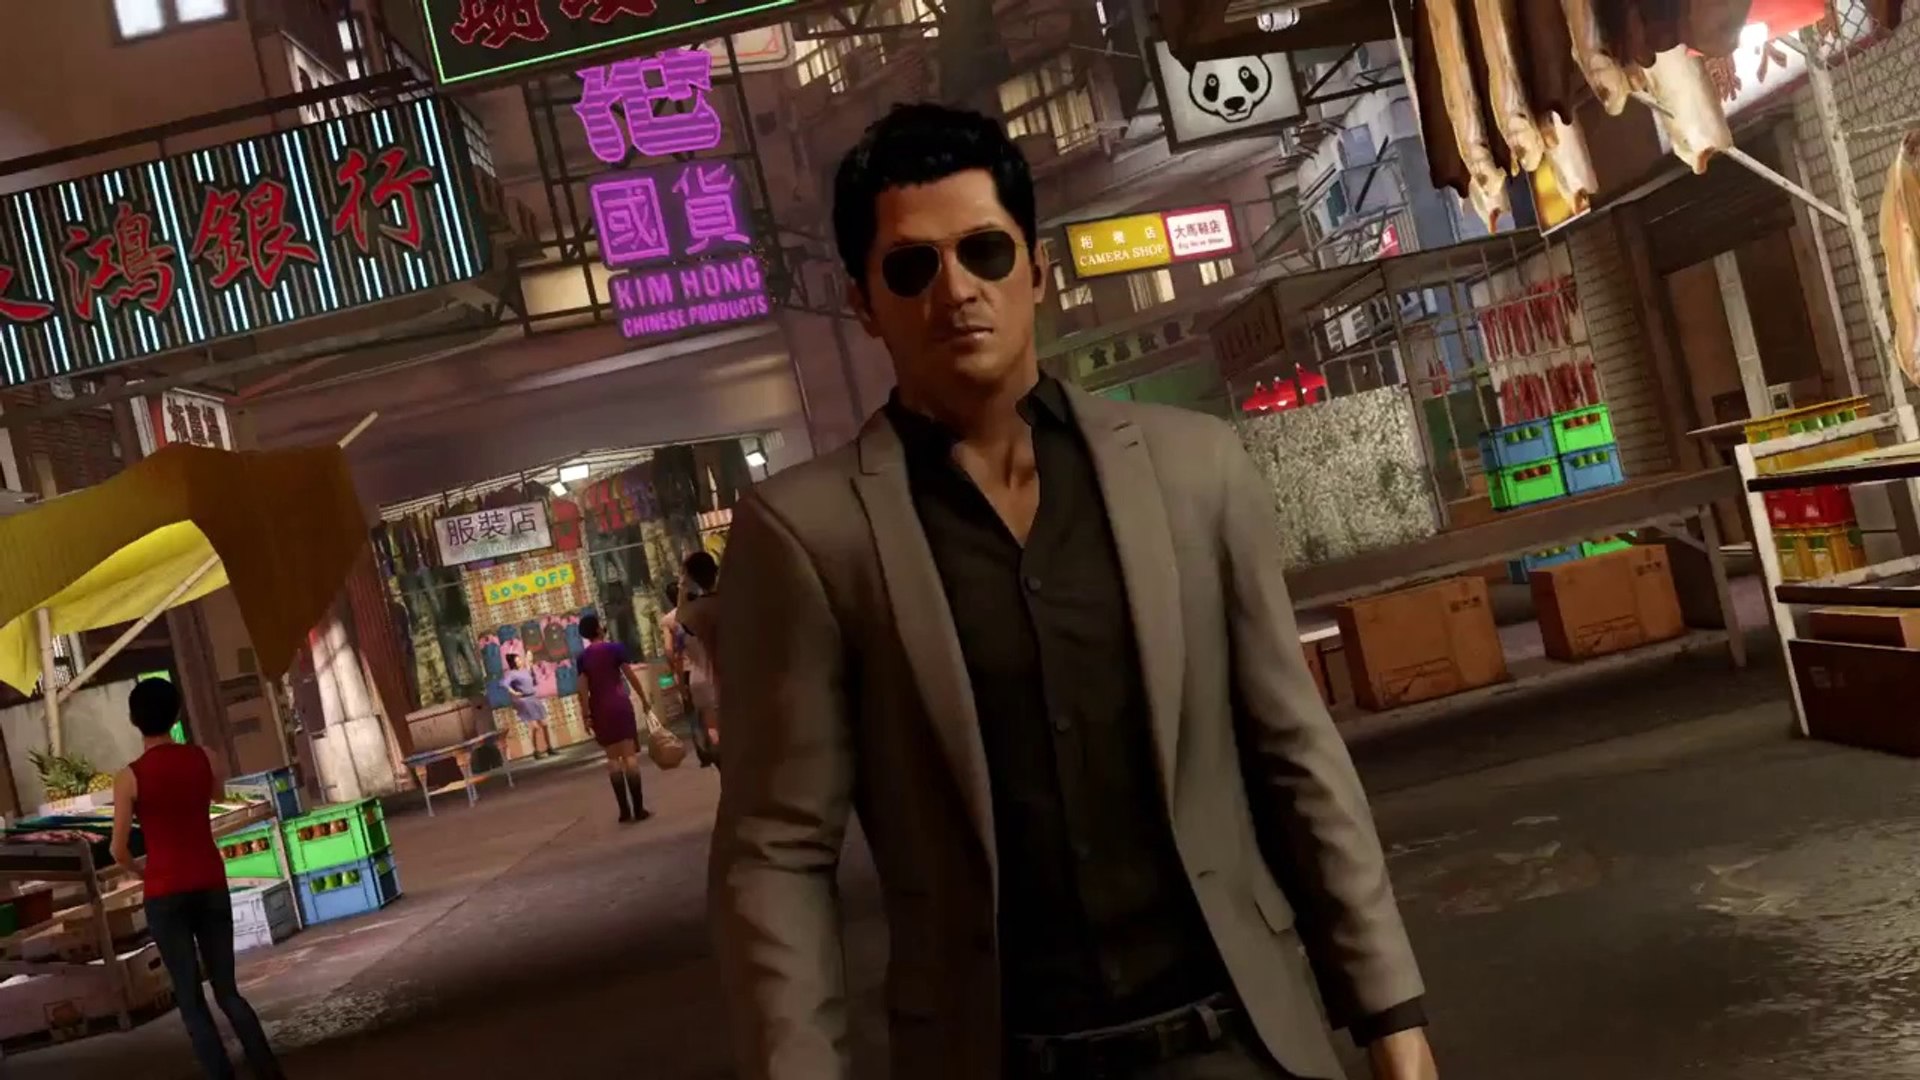 Watch the announcement trailer for Sleeping Dogs: Definitive